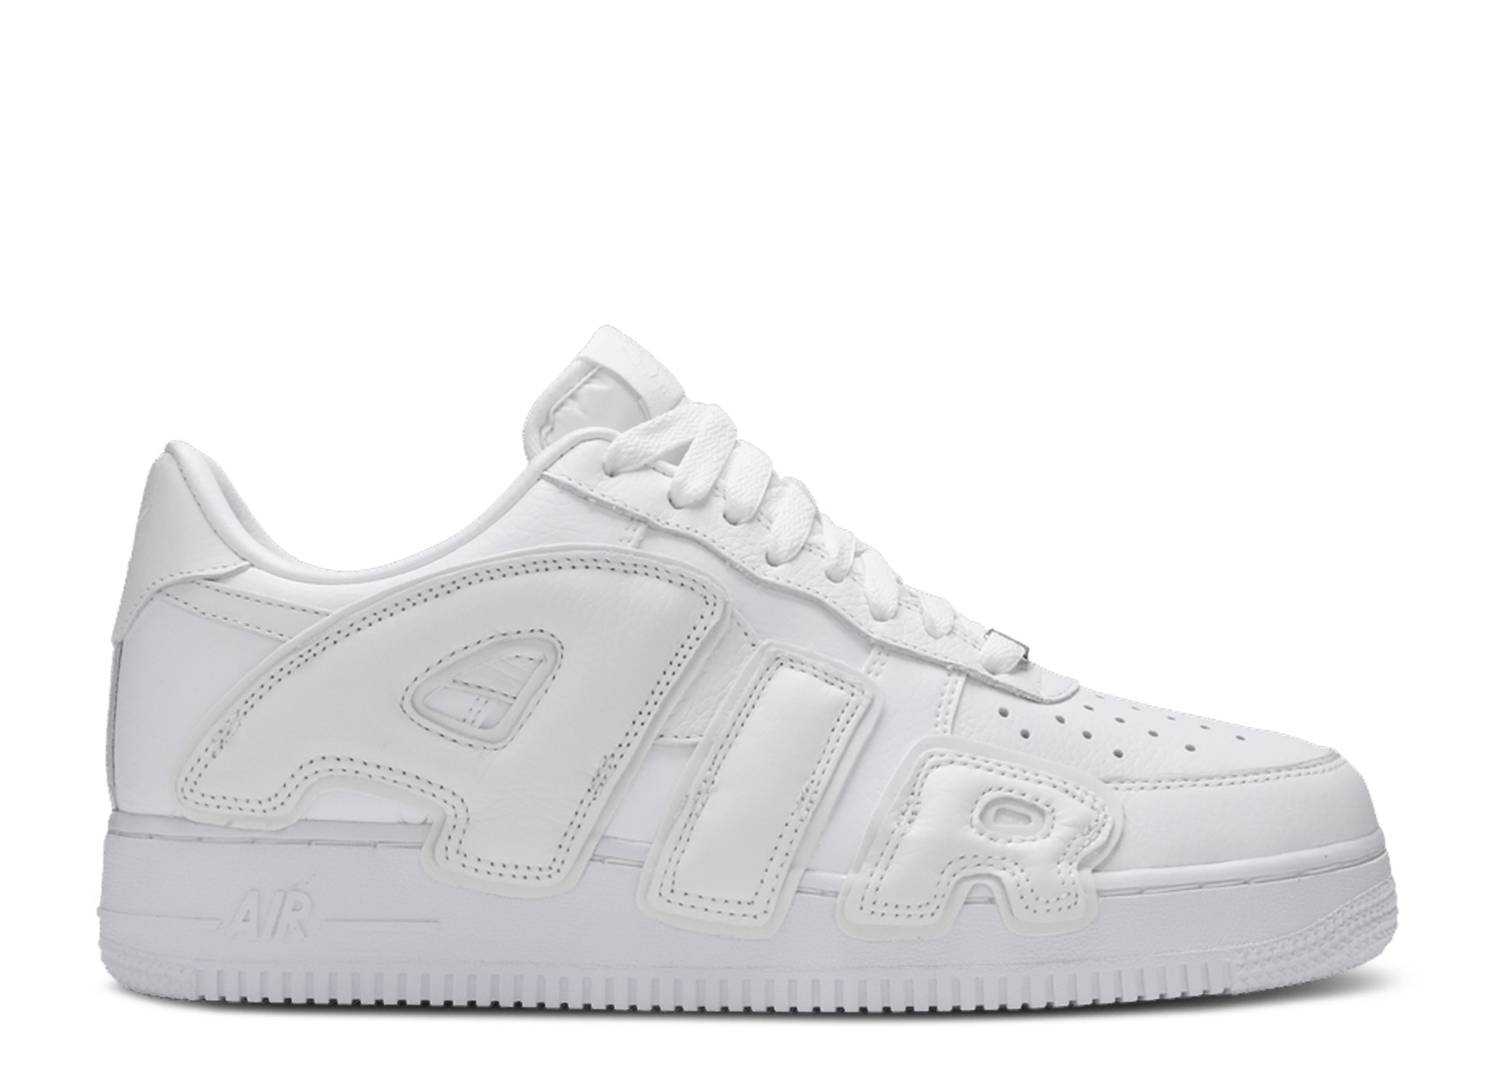 NIKE AIR FORCE 1 LOW X CPFM “WHITE”